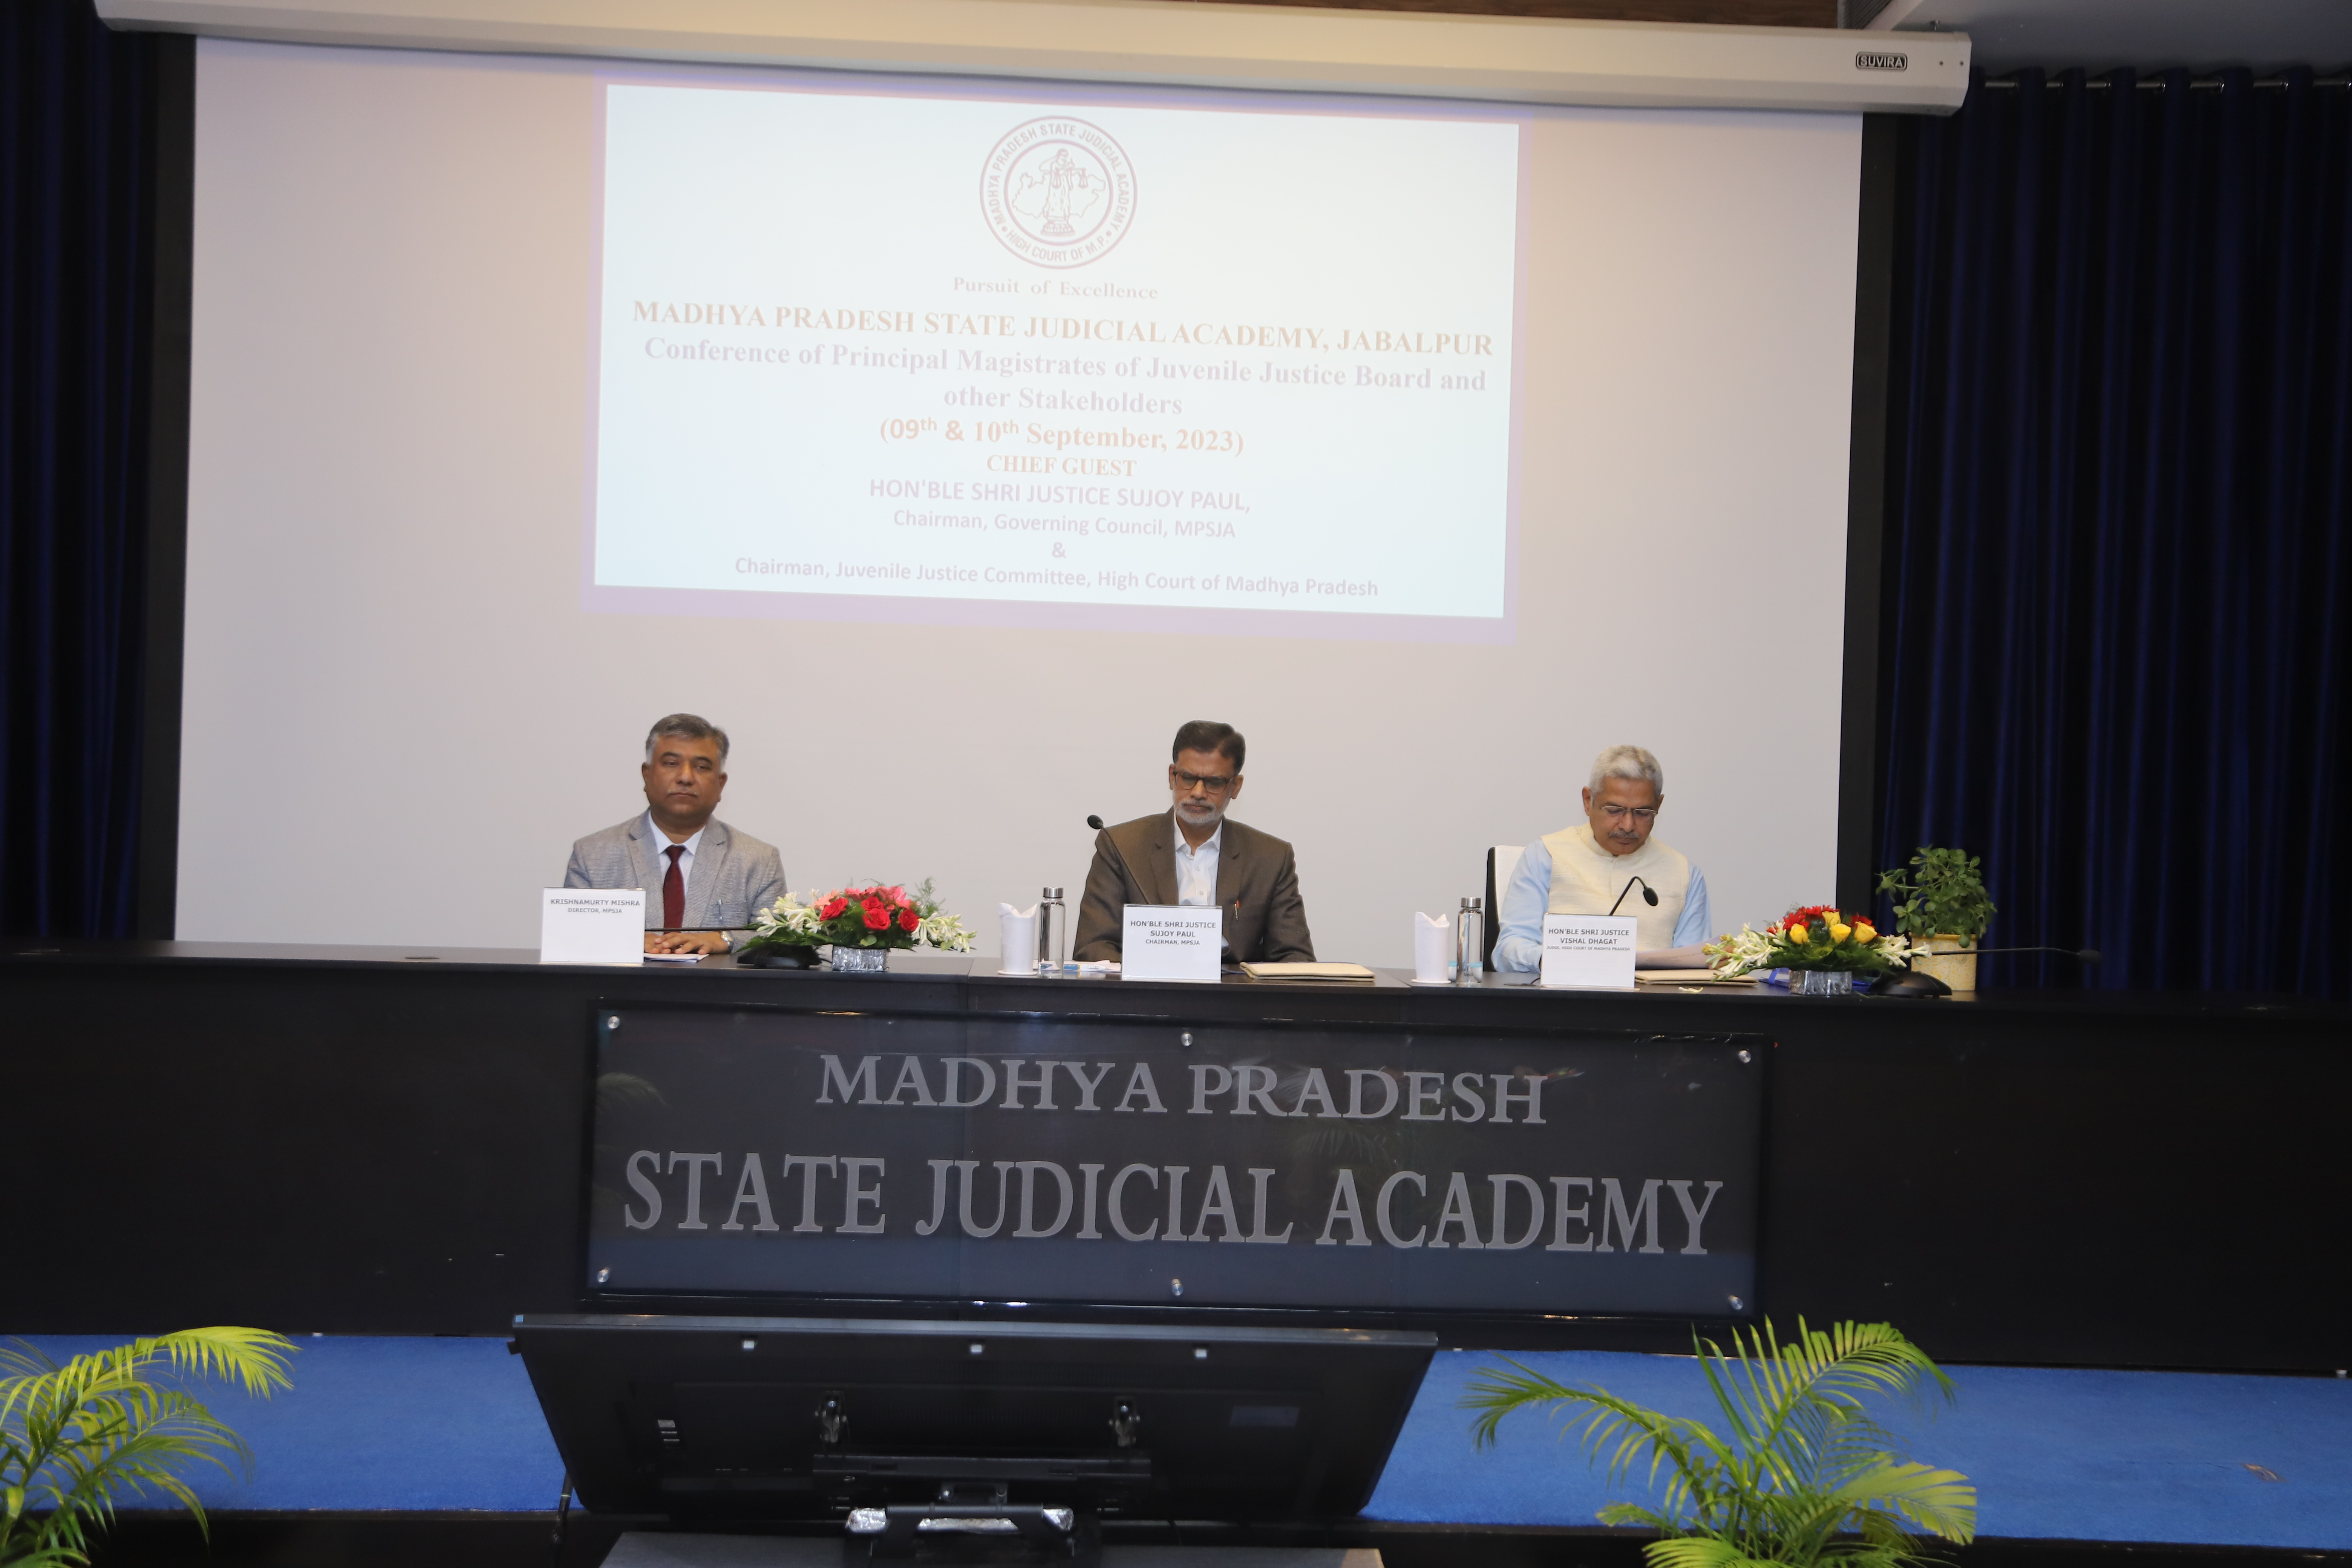 Conference of Principal Magistrates of Juvenile Justice Board and other Stakeholders